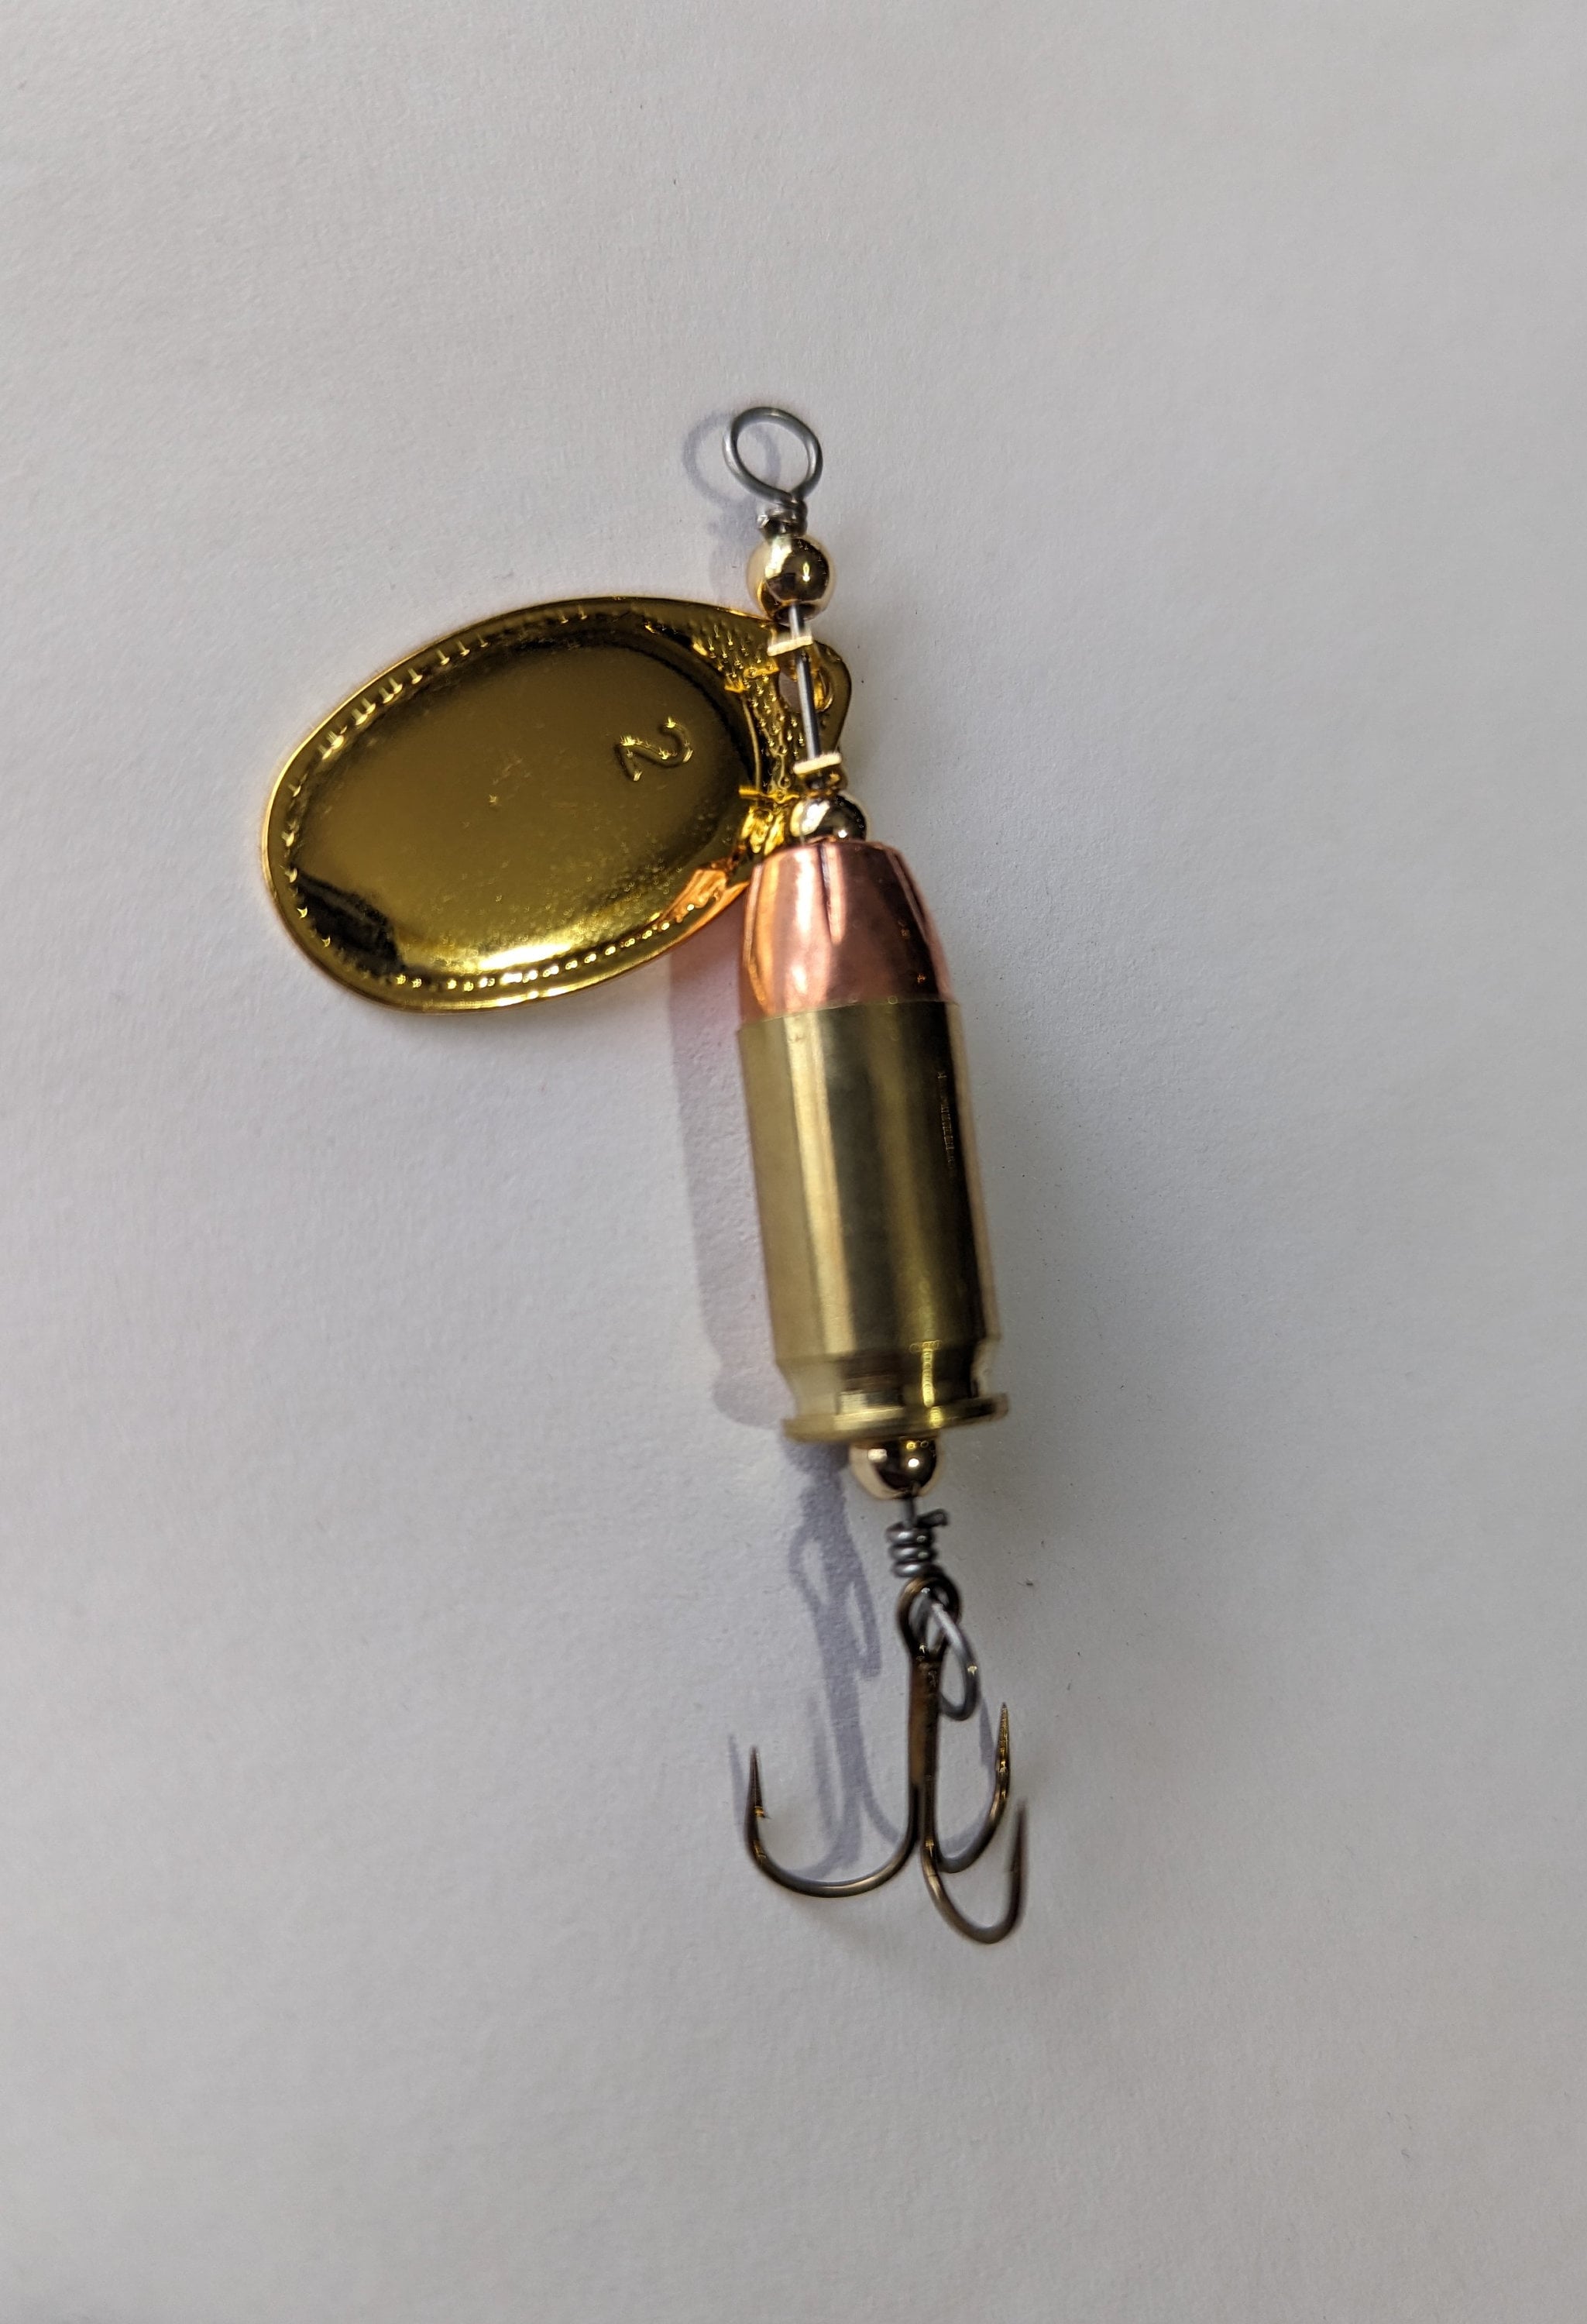 Fishing Lure Spinning 9mm Bullet Awesome Gift -  Canada